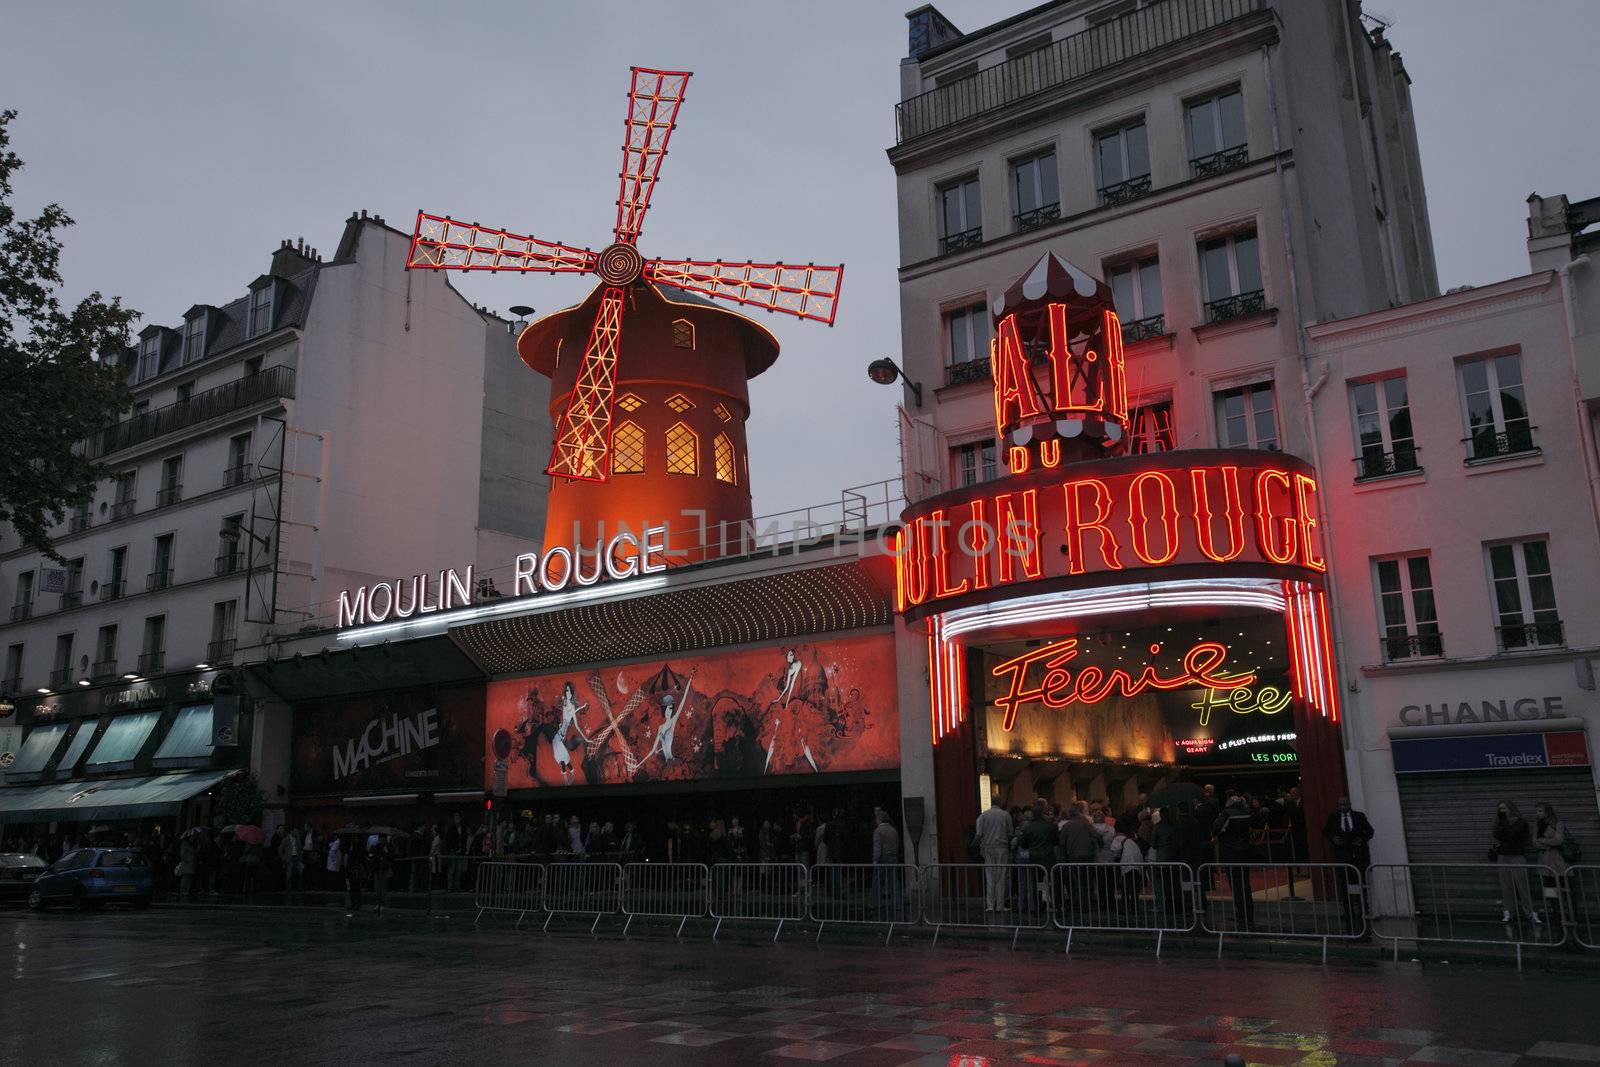 Moulin Rouge by Stocksnapper